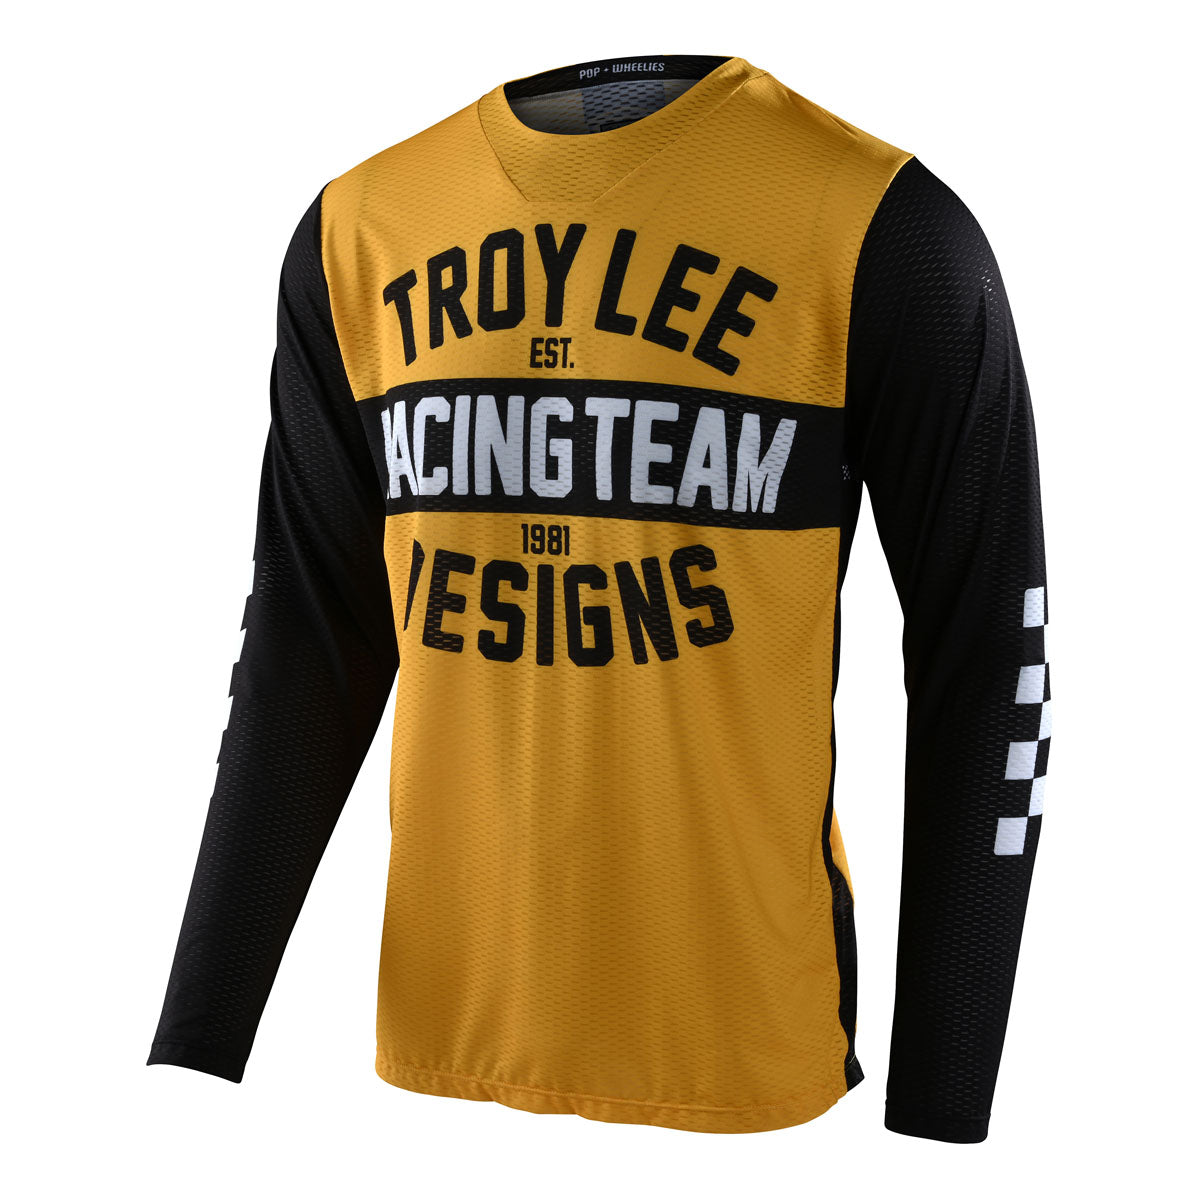 Troy Lee Designs GP Air Jersey - Team 81 (CLOSEOUT) - Yellow/Black